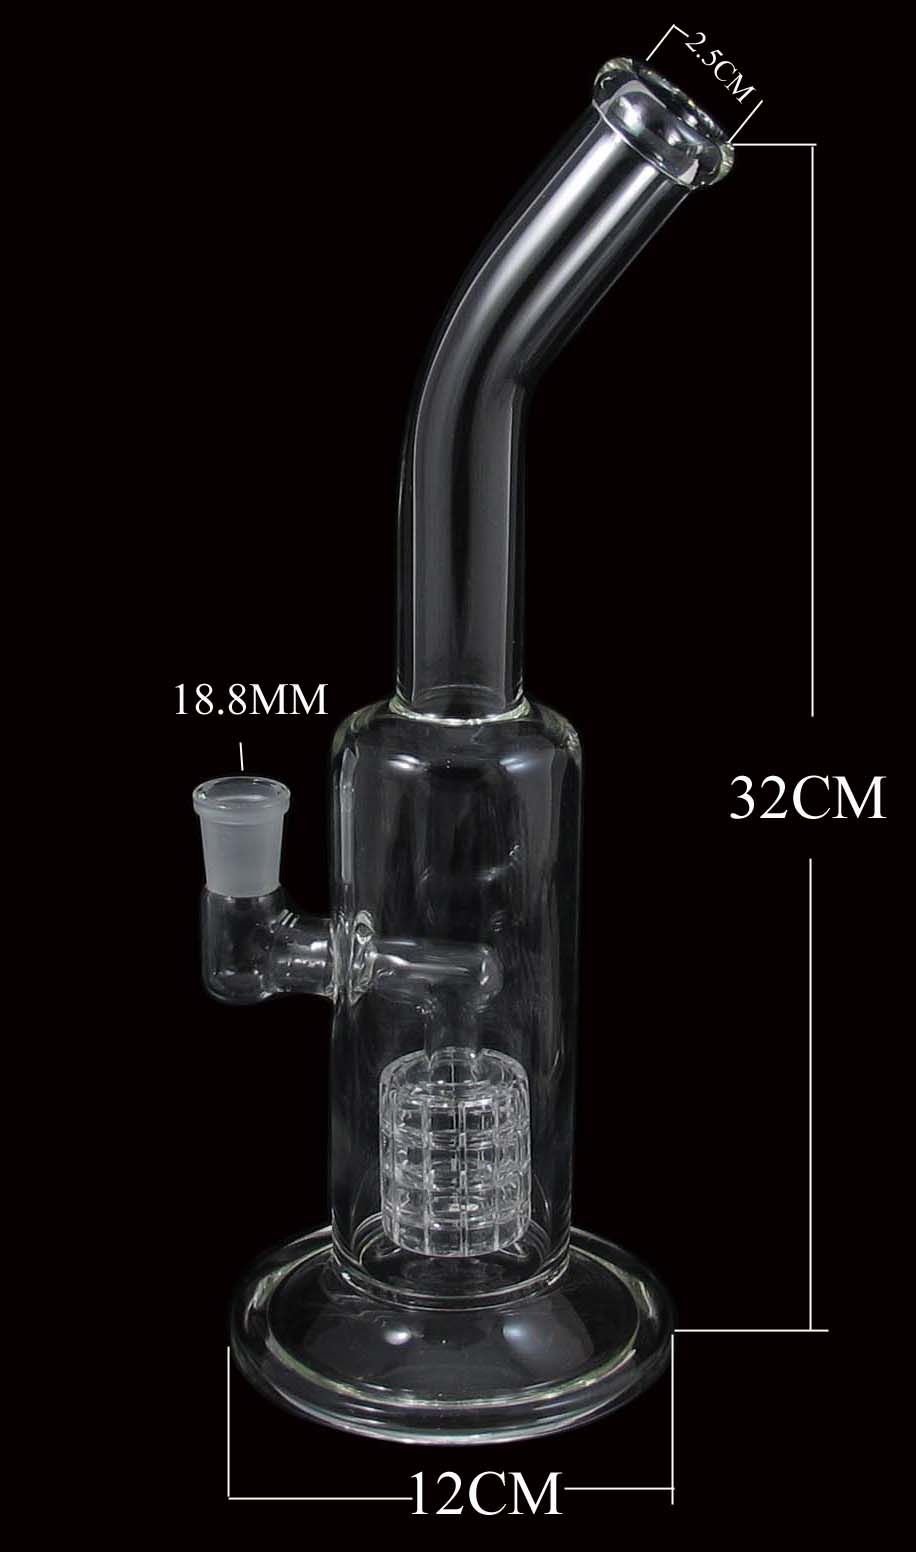 g18-two-functions-glass-water-smoking-pipe.jpg